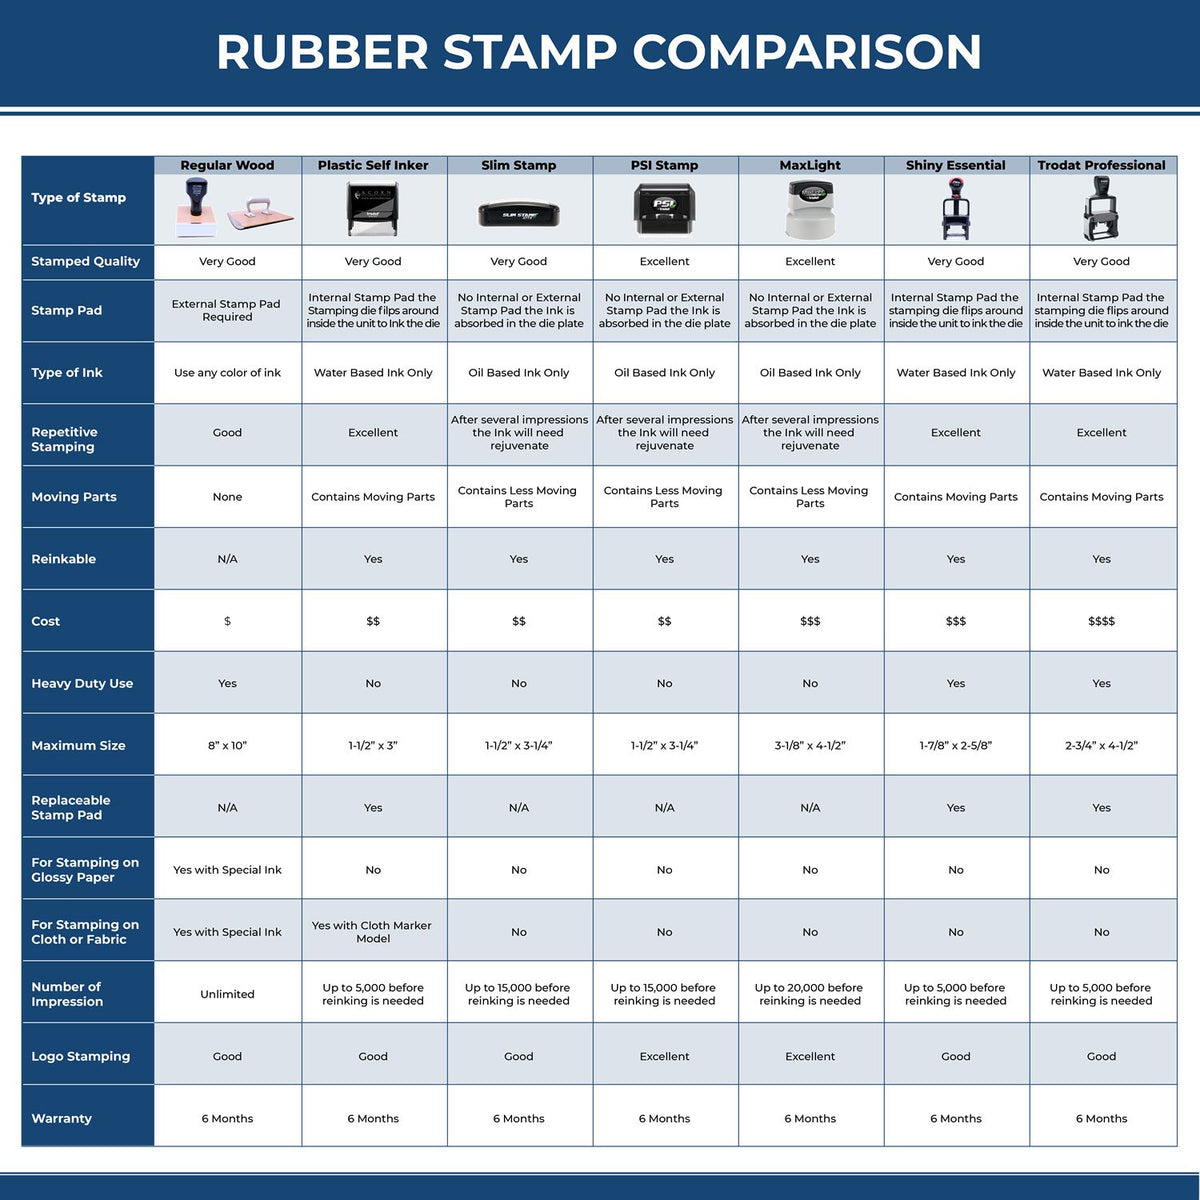 Vacant Rubber Stamp 4760R Rubber Stamp Comparison